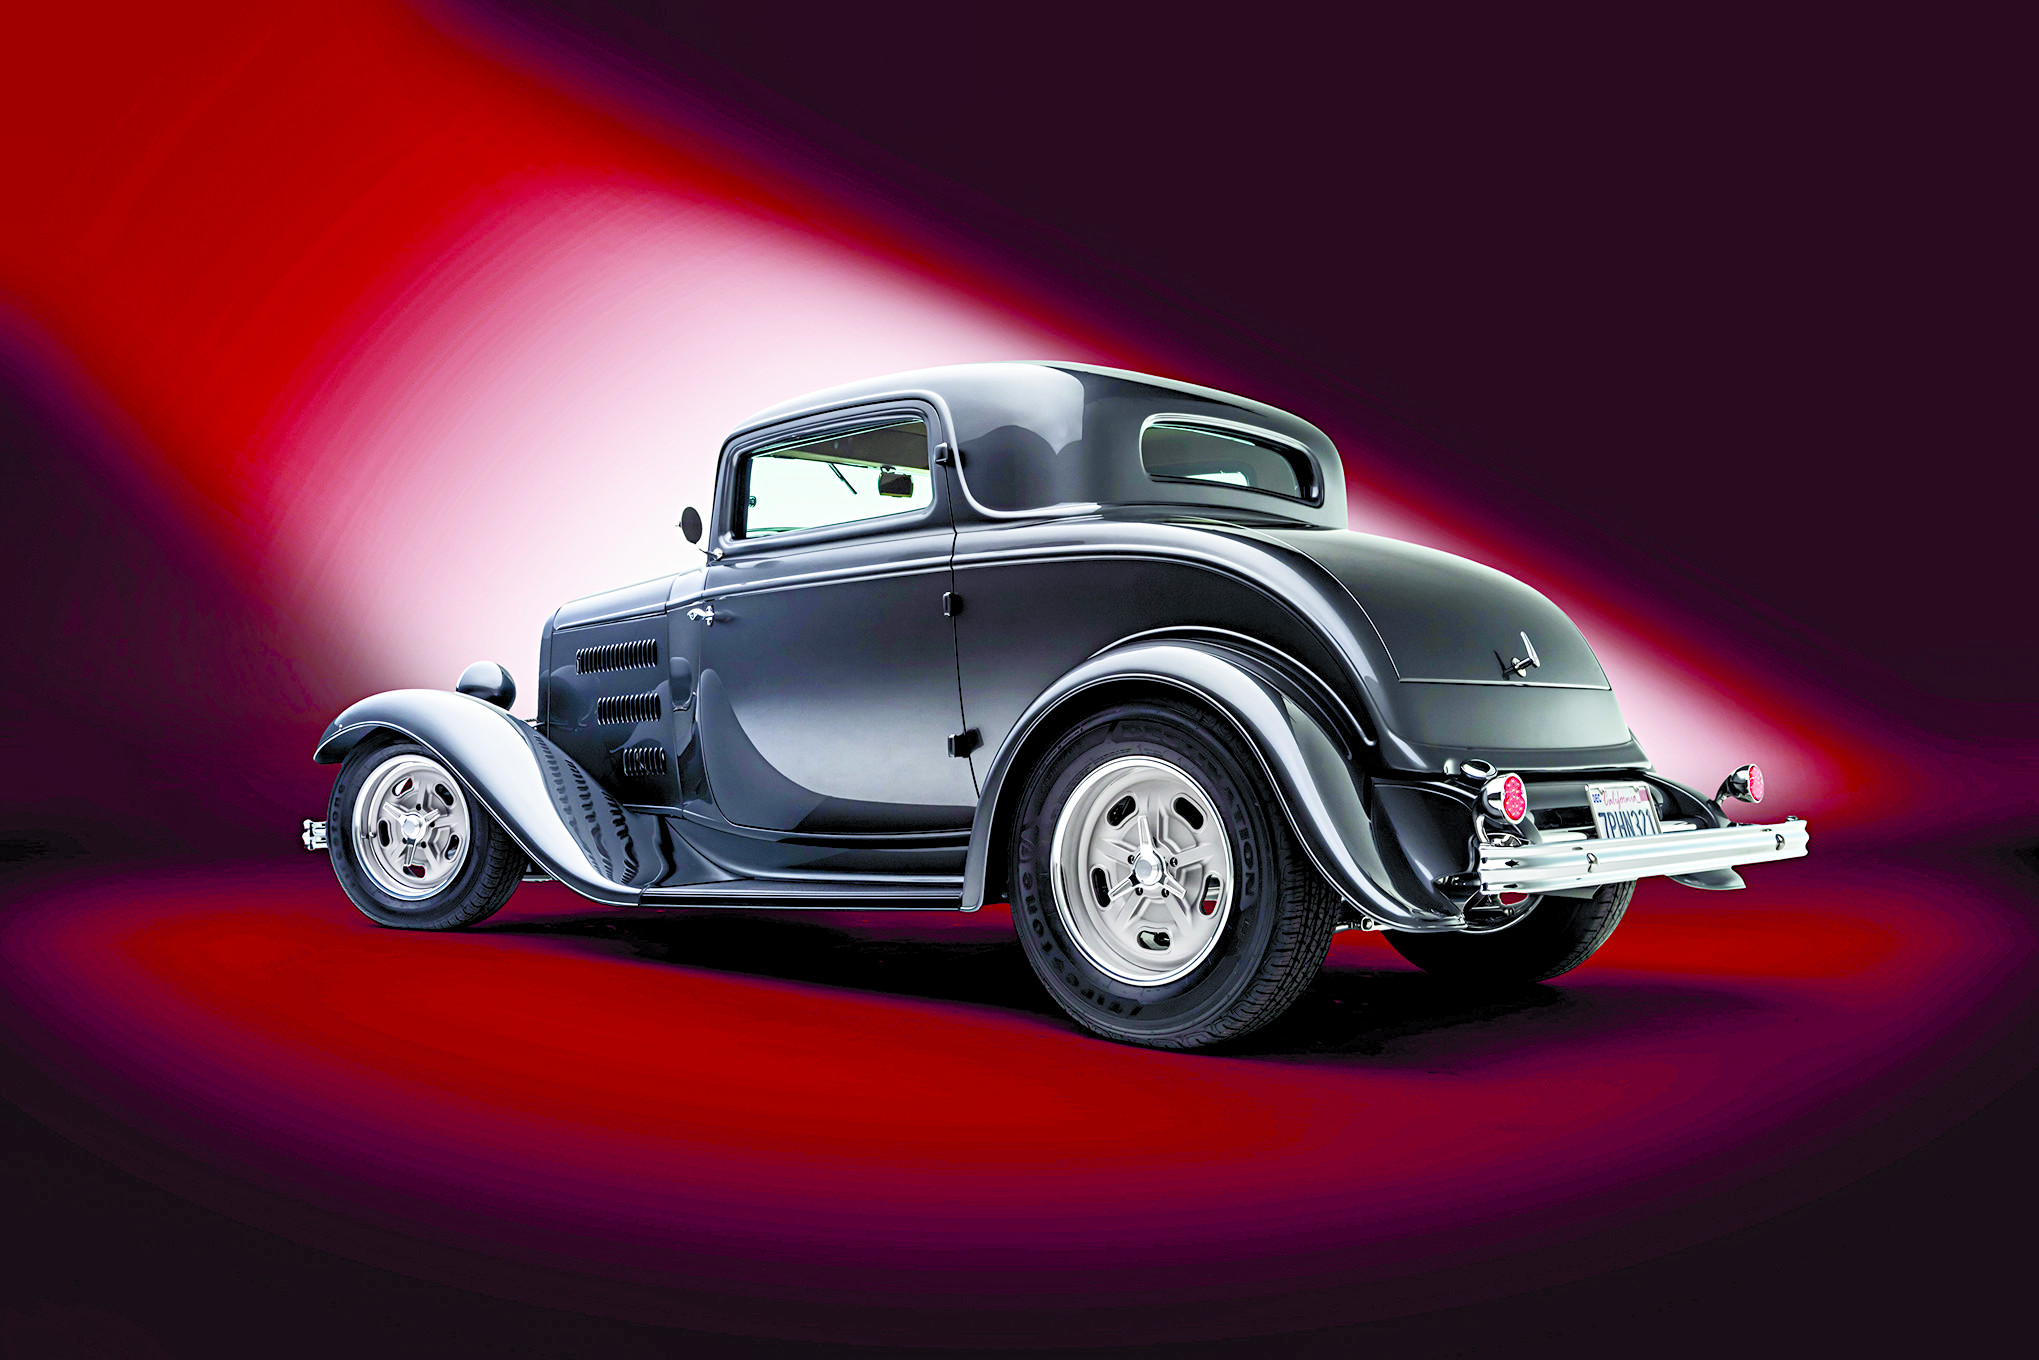  1932 Ford Coupe Full HD Wallpaper